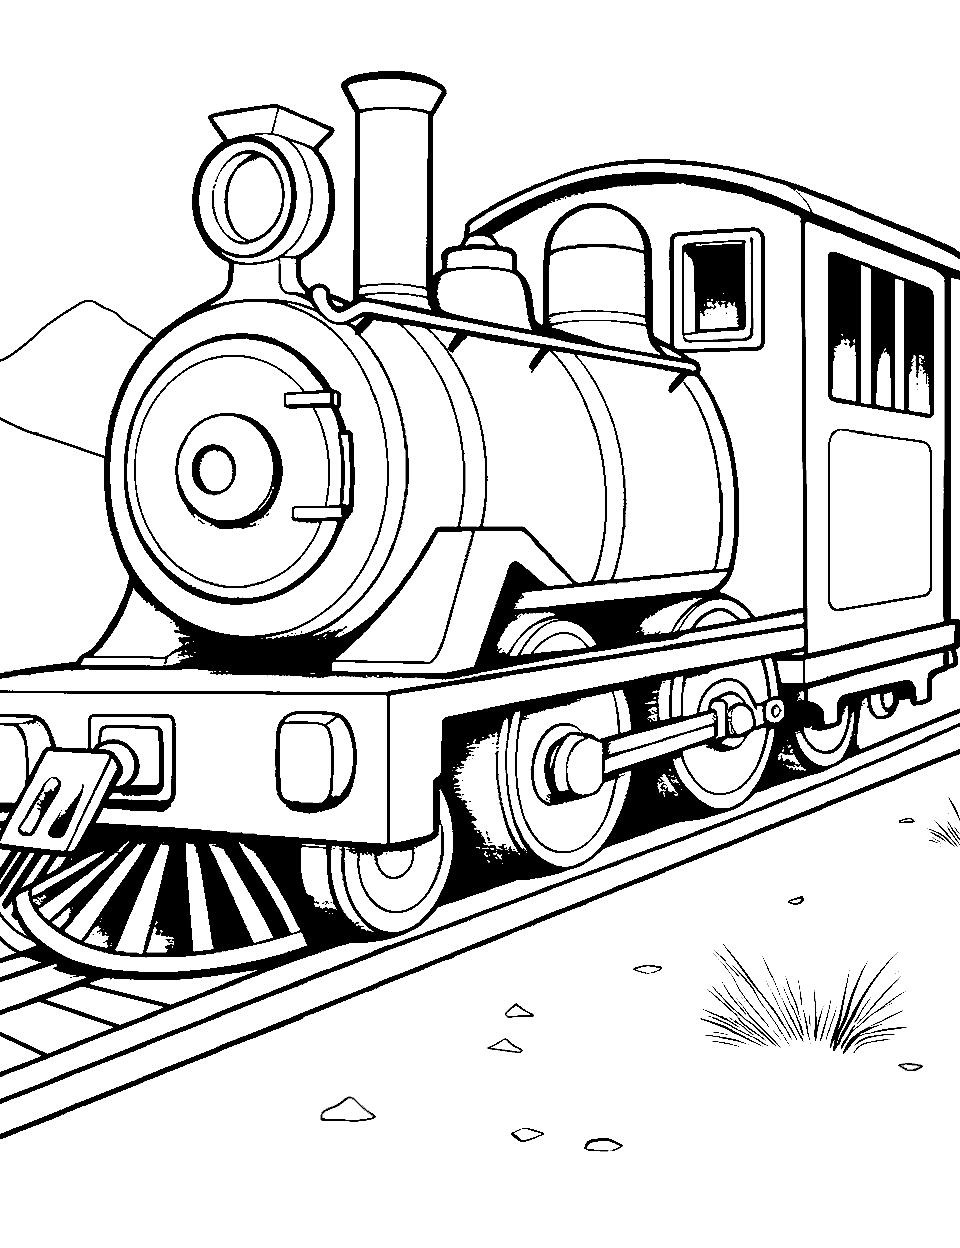 Old West Steam Train Coloring Page - A classic western steam train chugging through a desert.